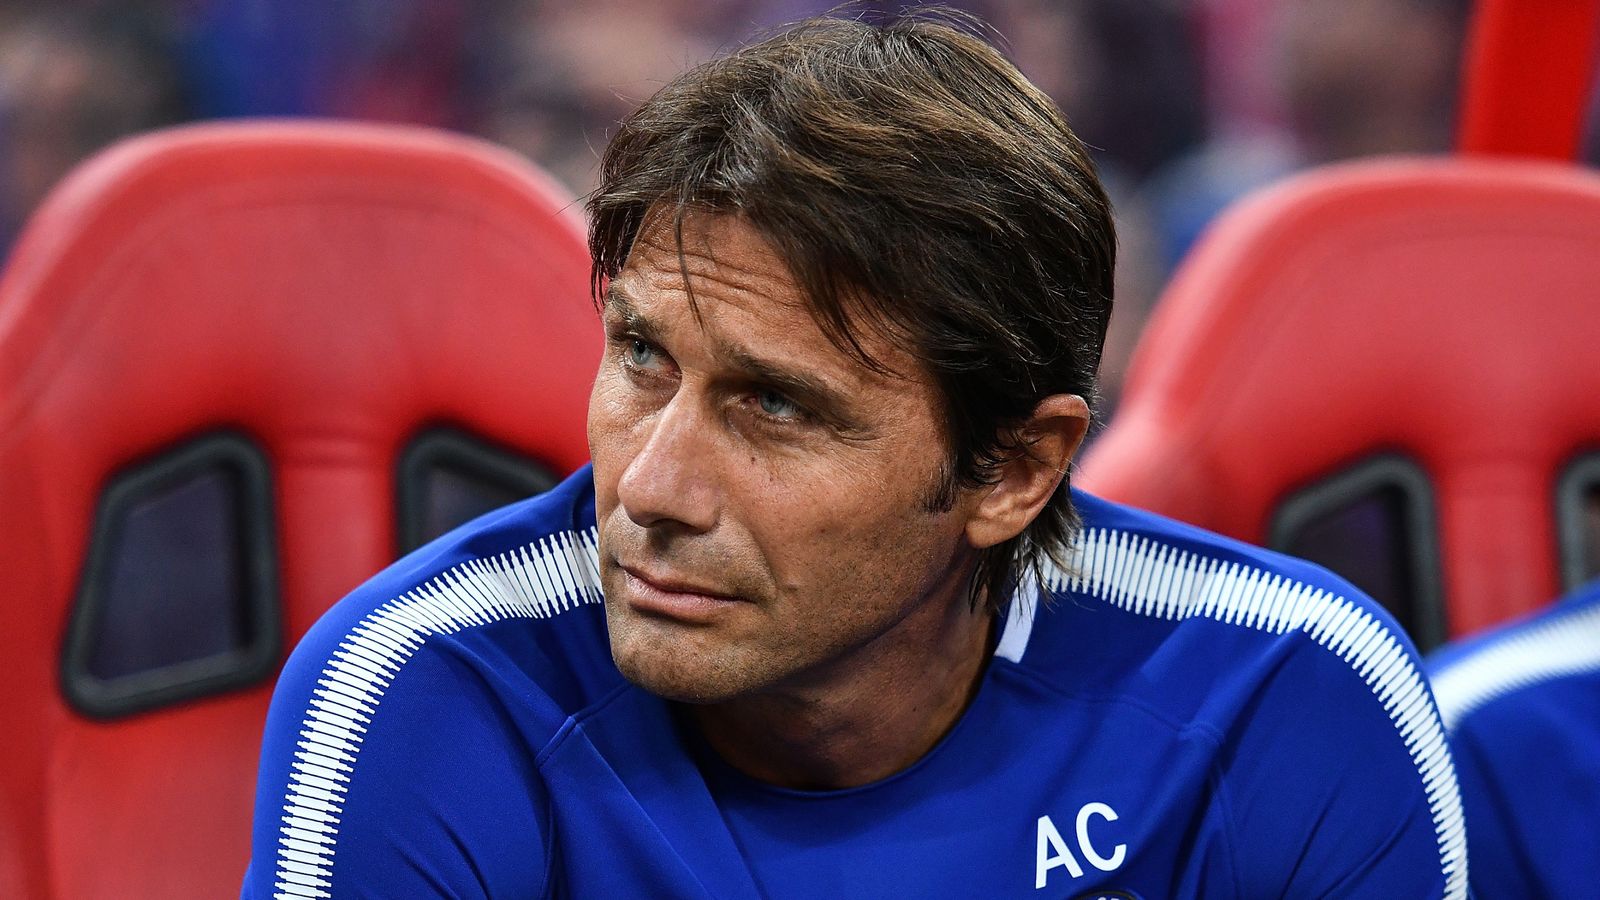 Antonio Conte: Chelsea need new signings for Premier League title